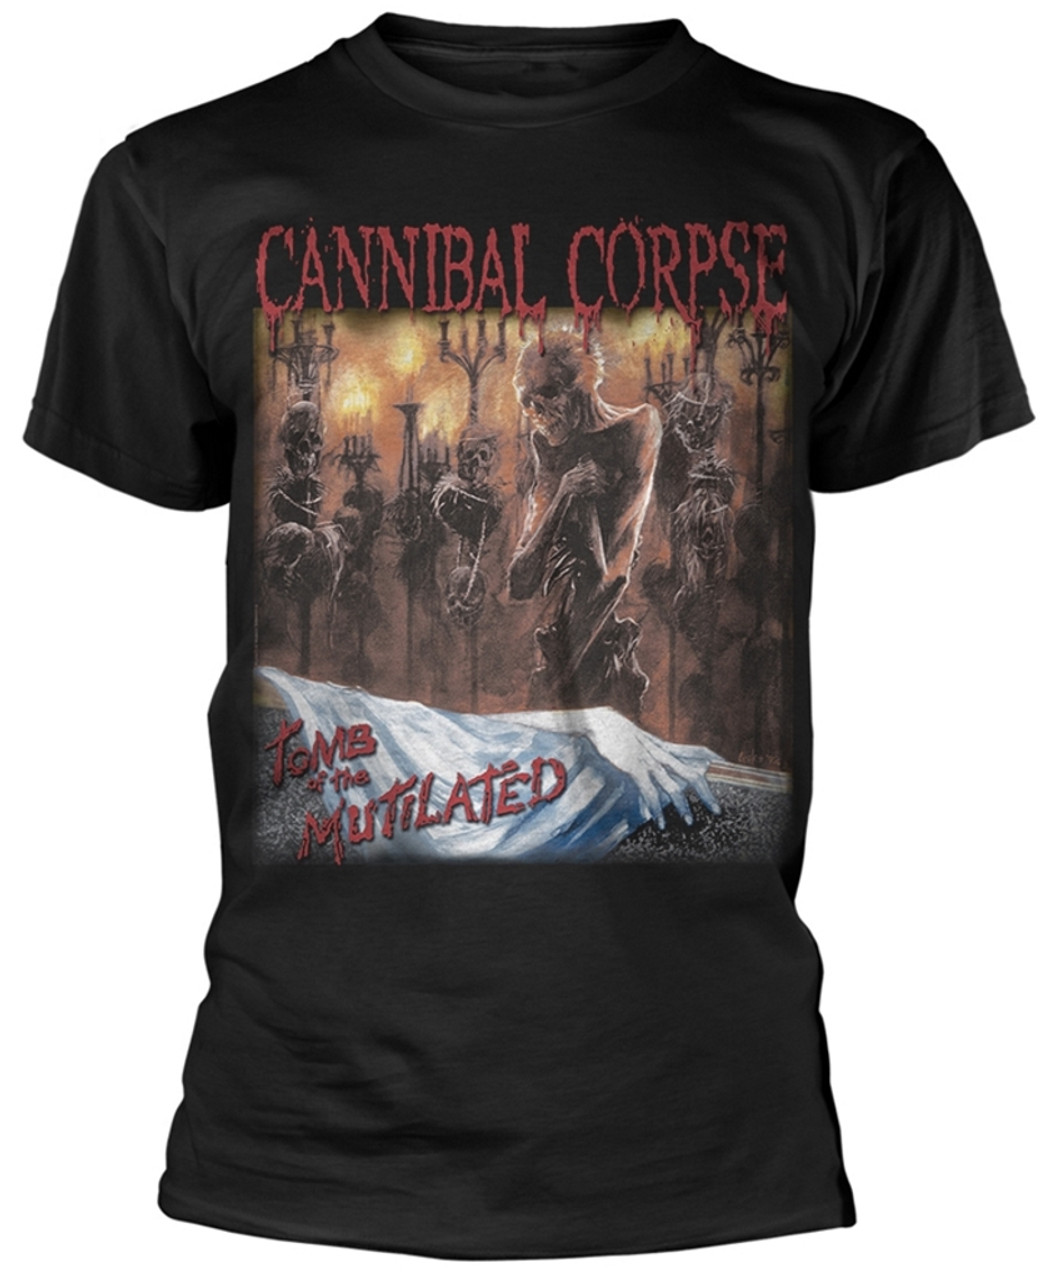 Cannibal Corpse 'Tomb Of The Mutilated' T-Shirt